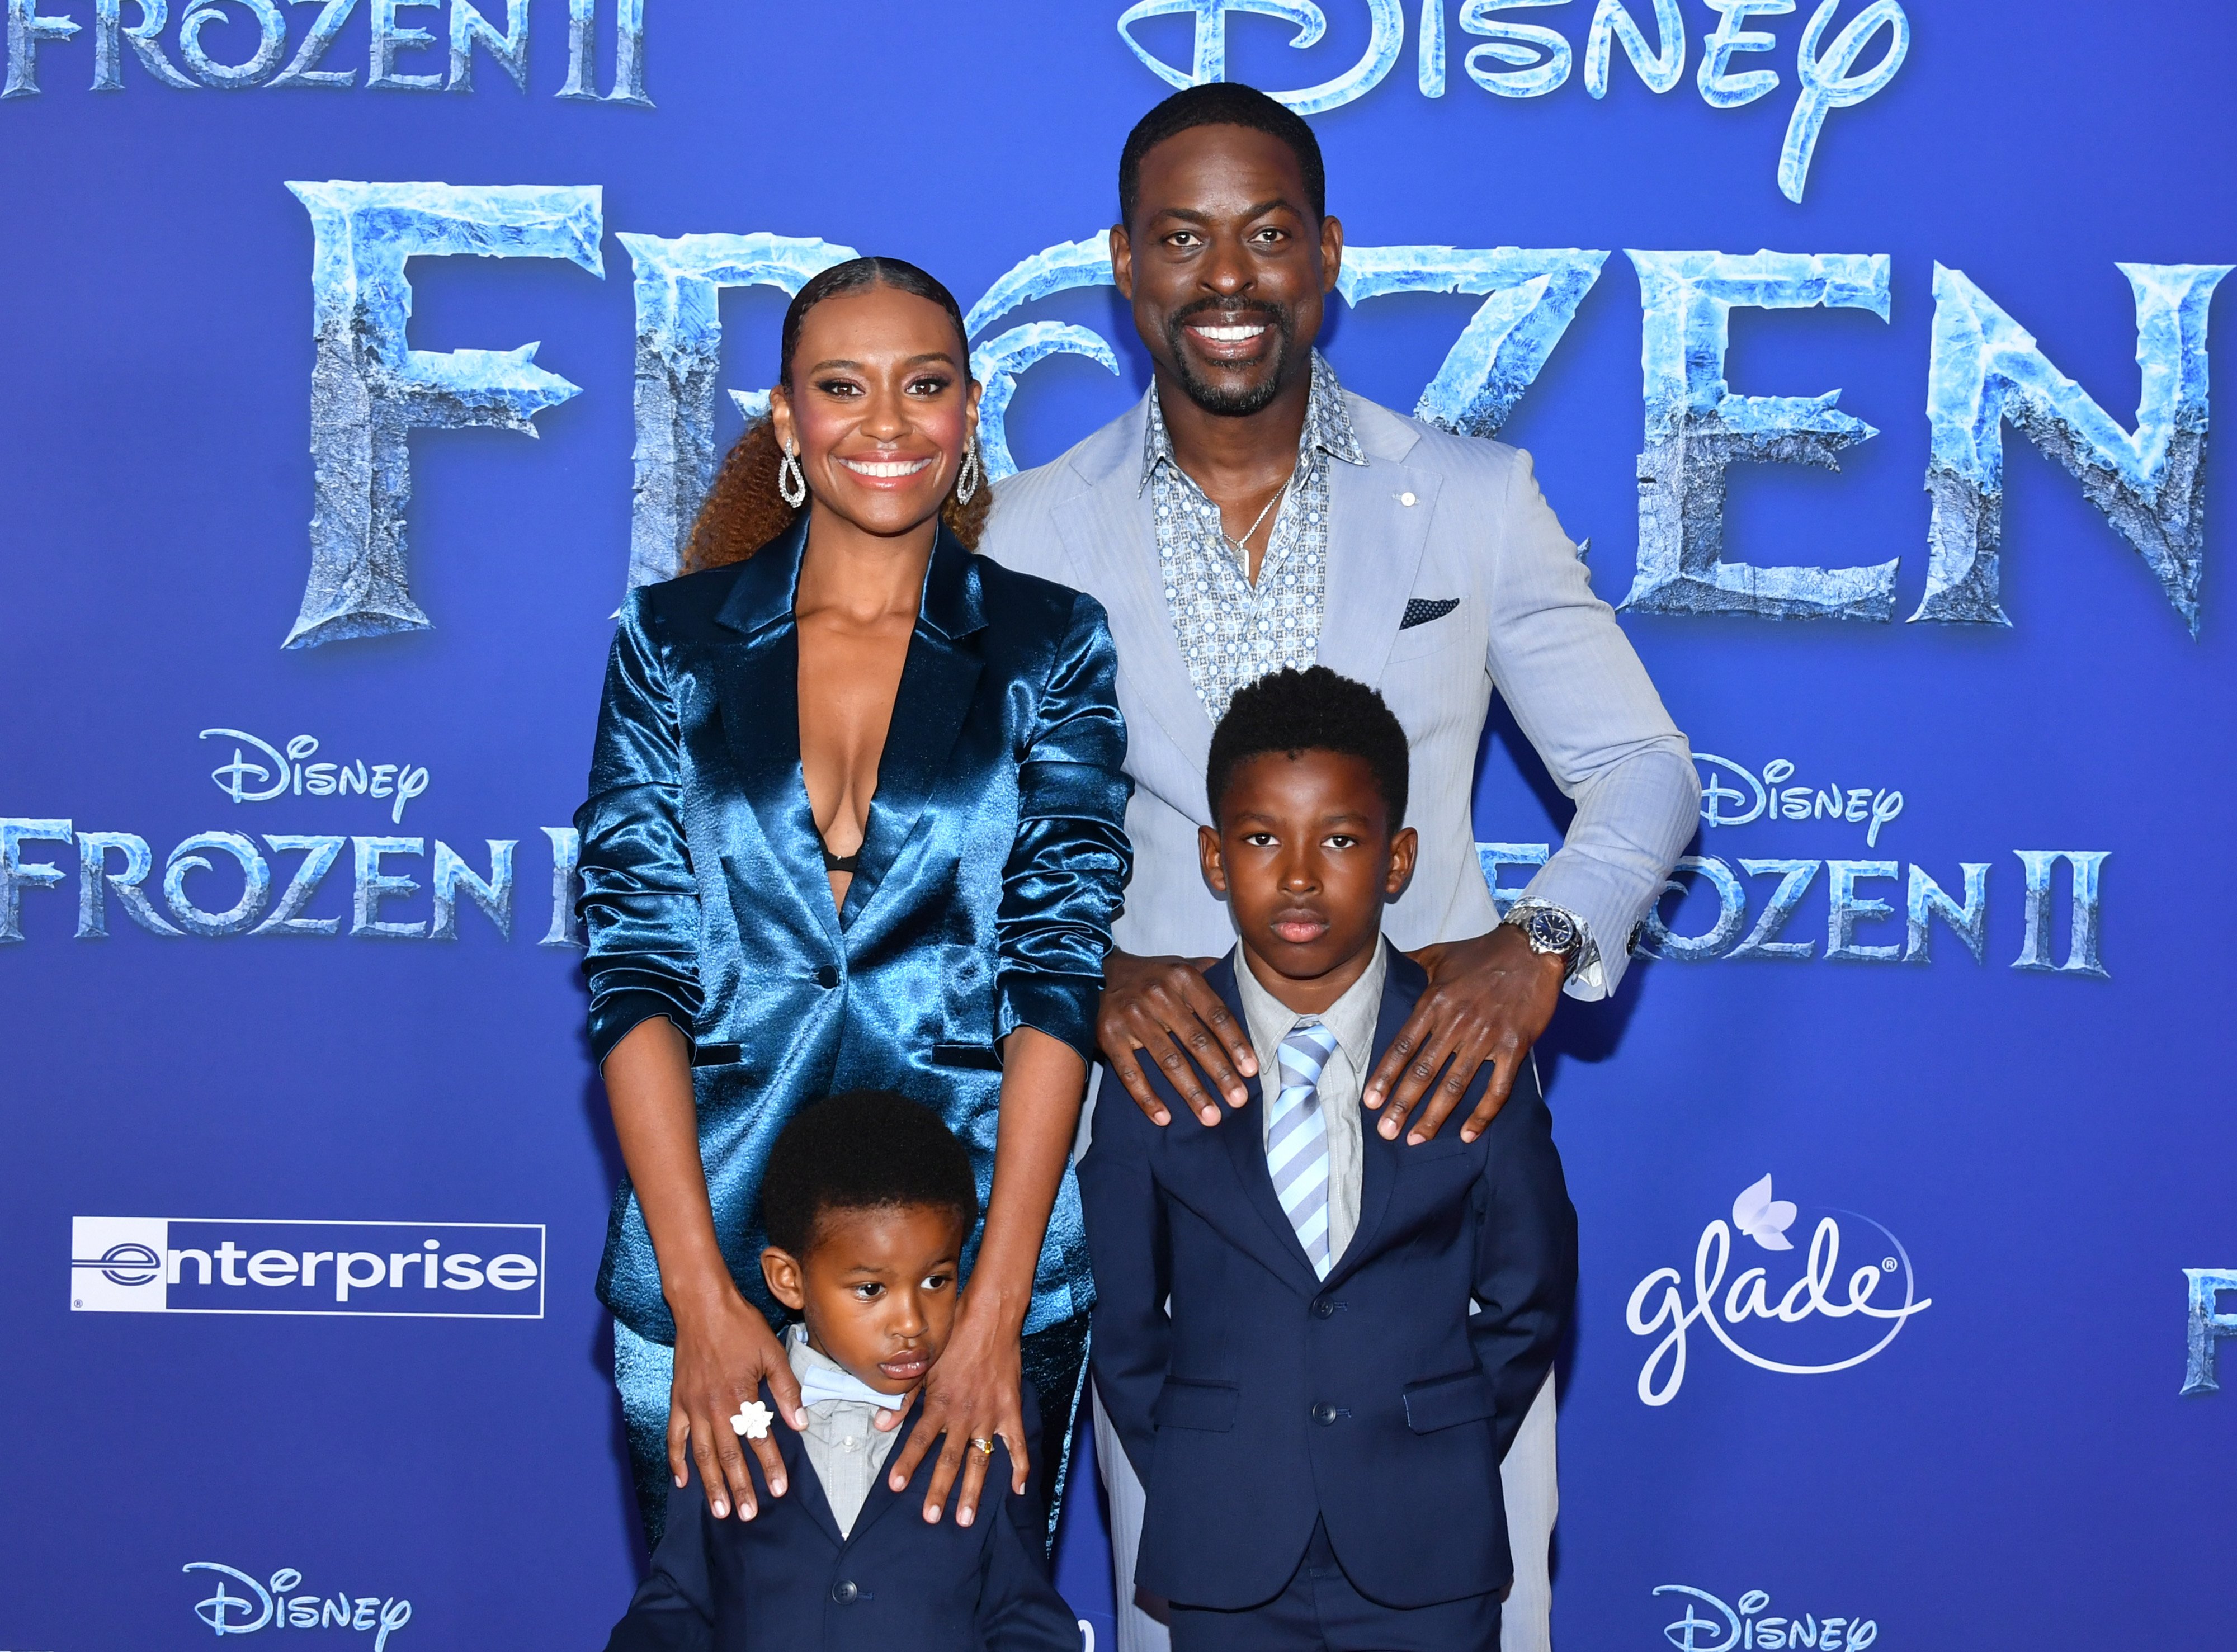 Ryan Michelle Bathe & Sterling K. Brown with their sons at the premiere of "Frozen 2" on Nov. 07, 2019 in California | Photo: Getty Images